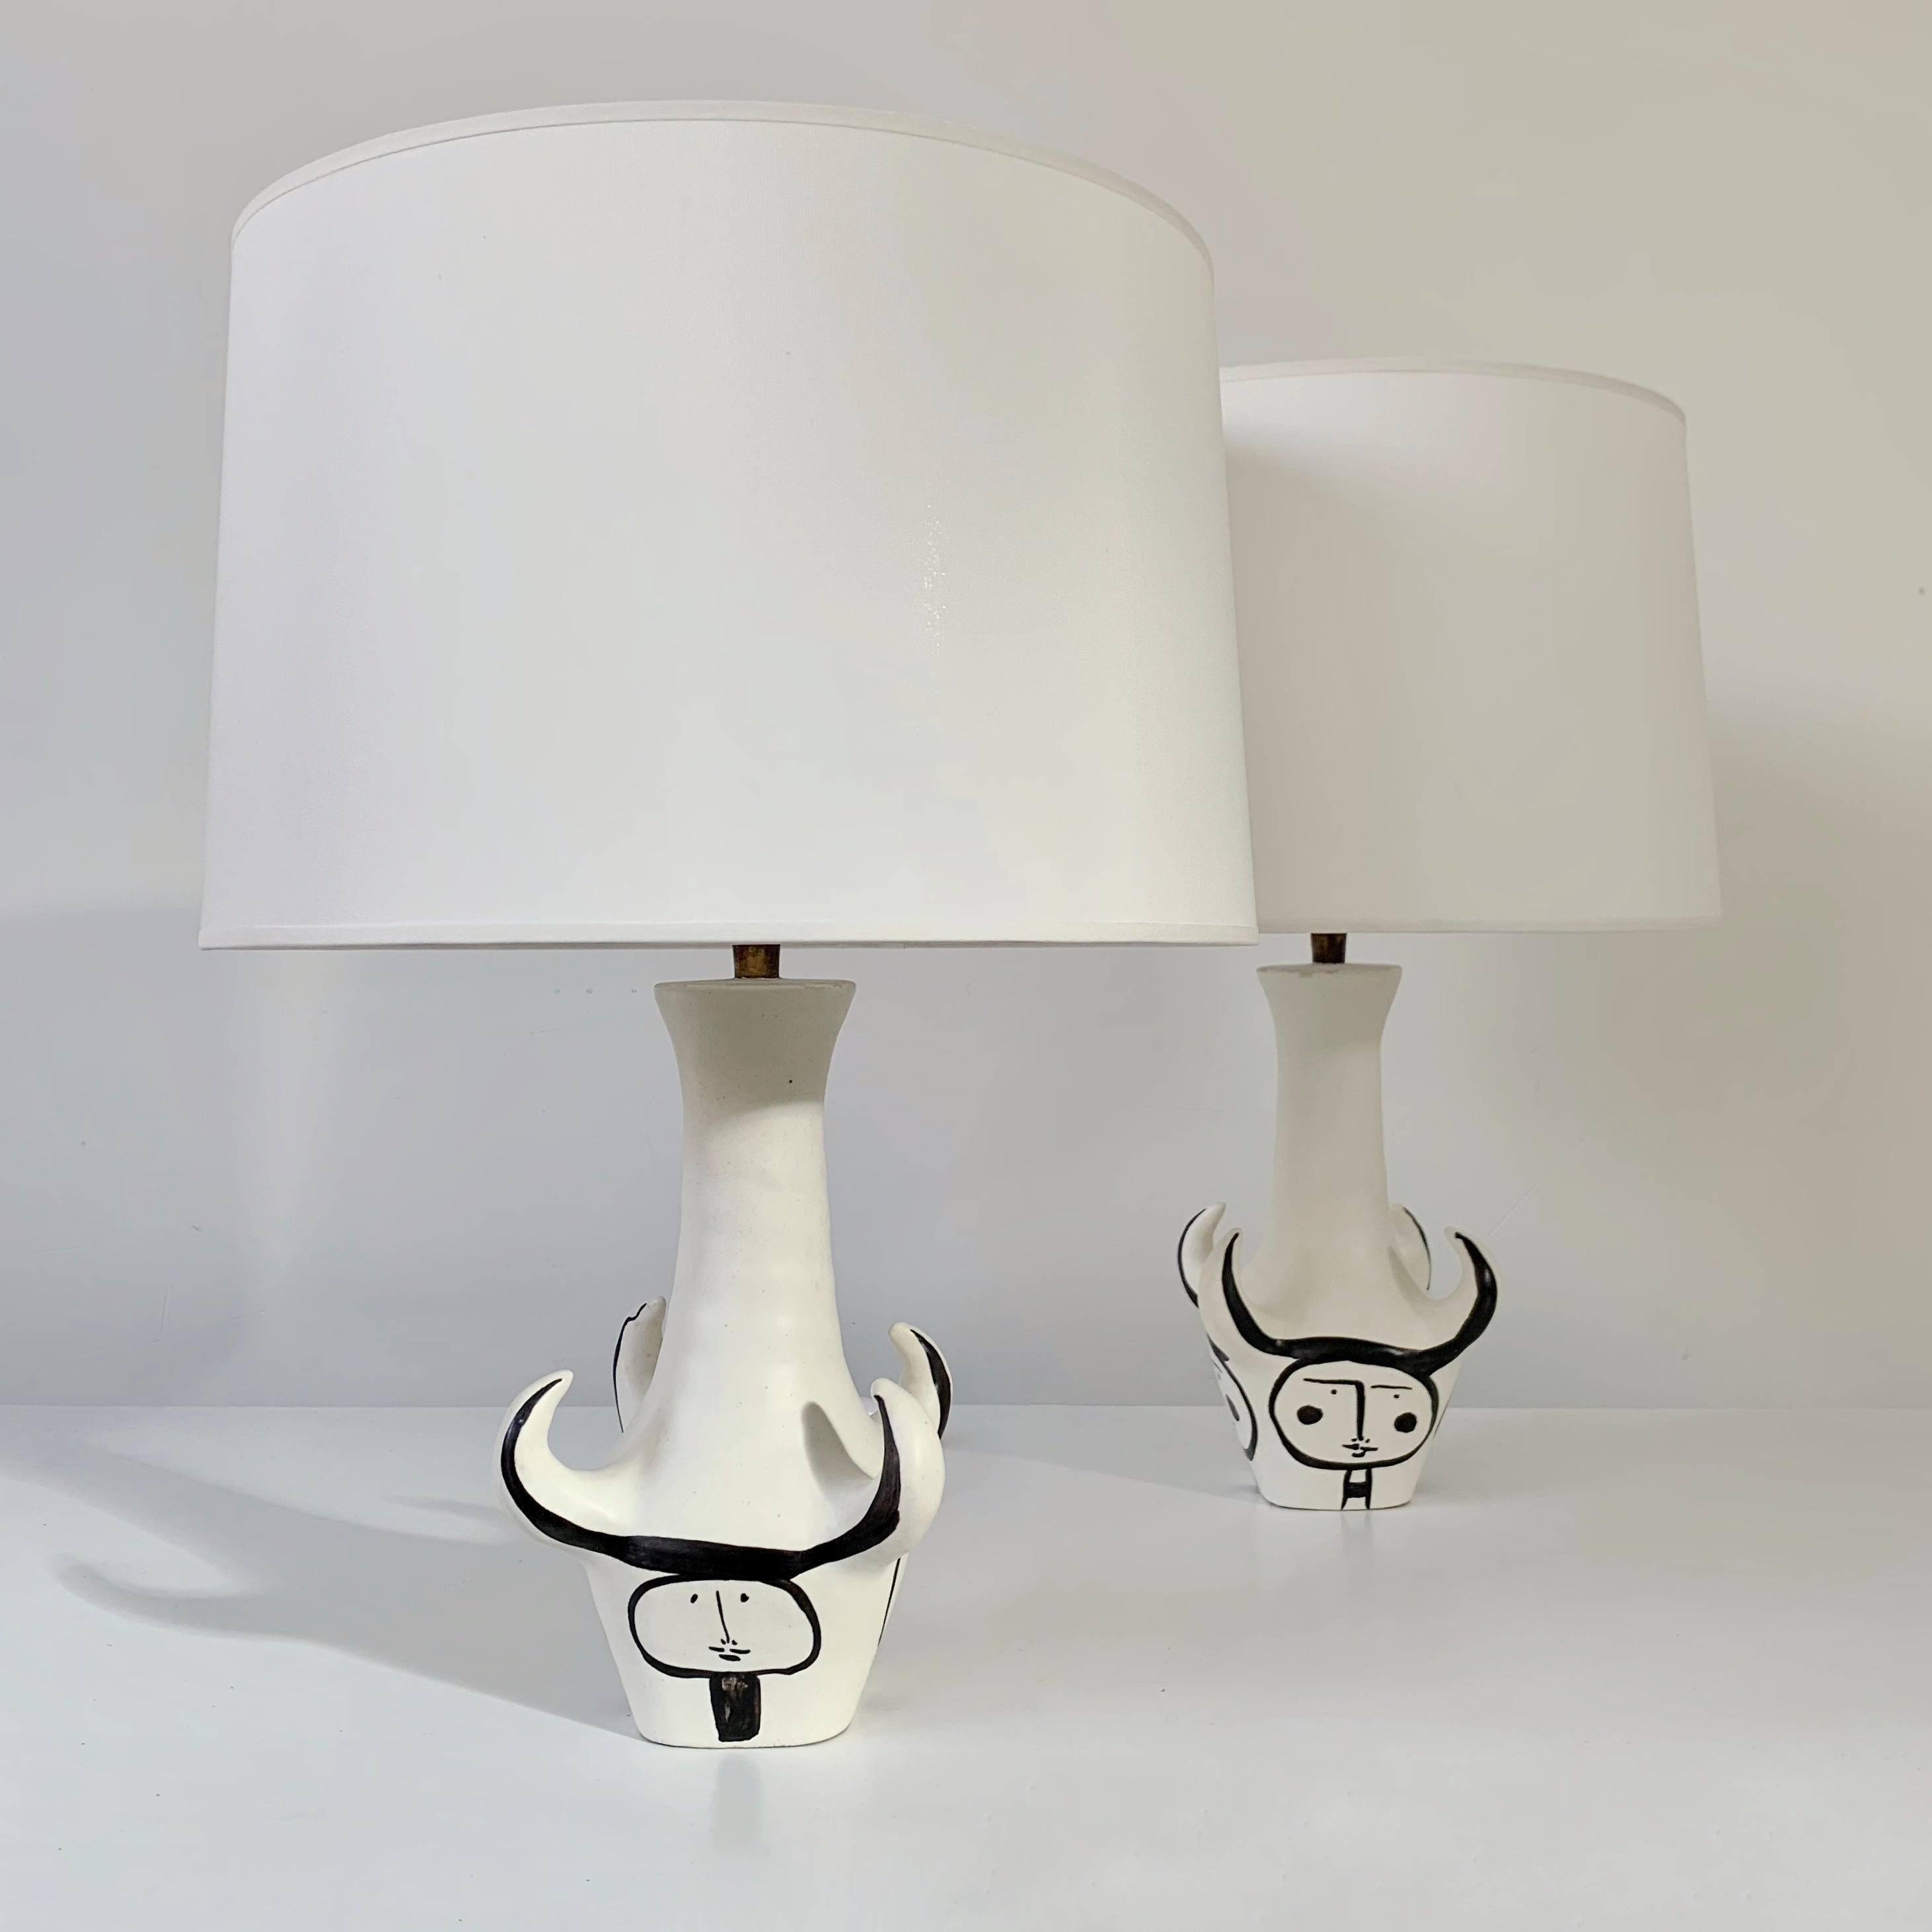 Enameled  Roger Capron Pair Of 4 Horns Signed Ceramic Table Lamps , circa 1955, France. For Sale